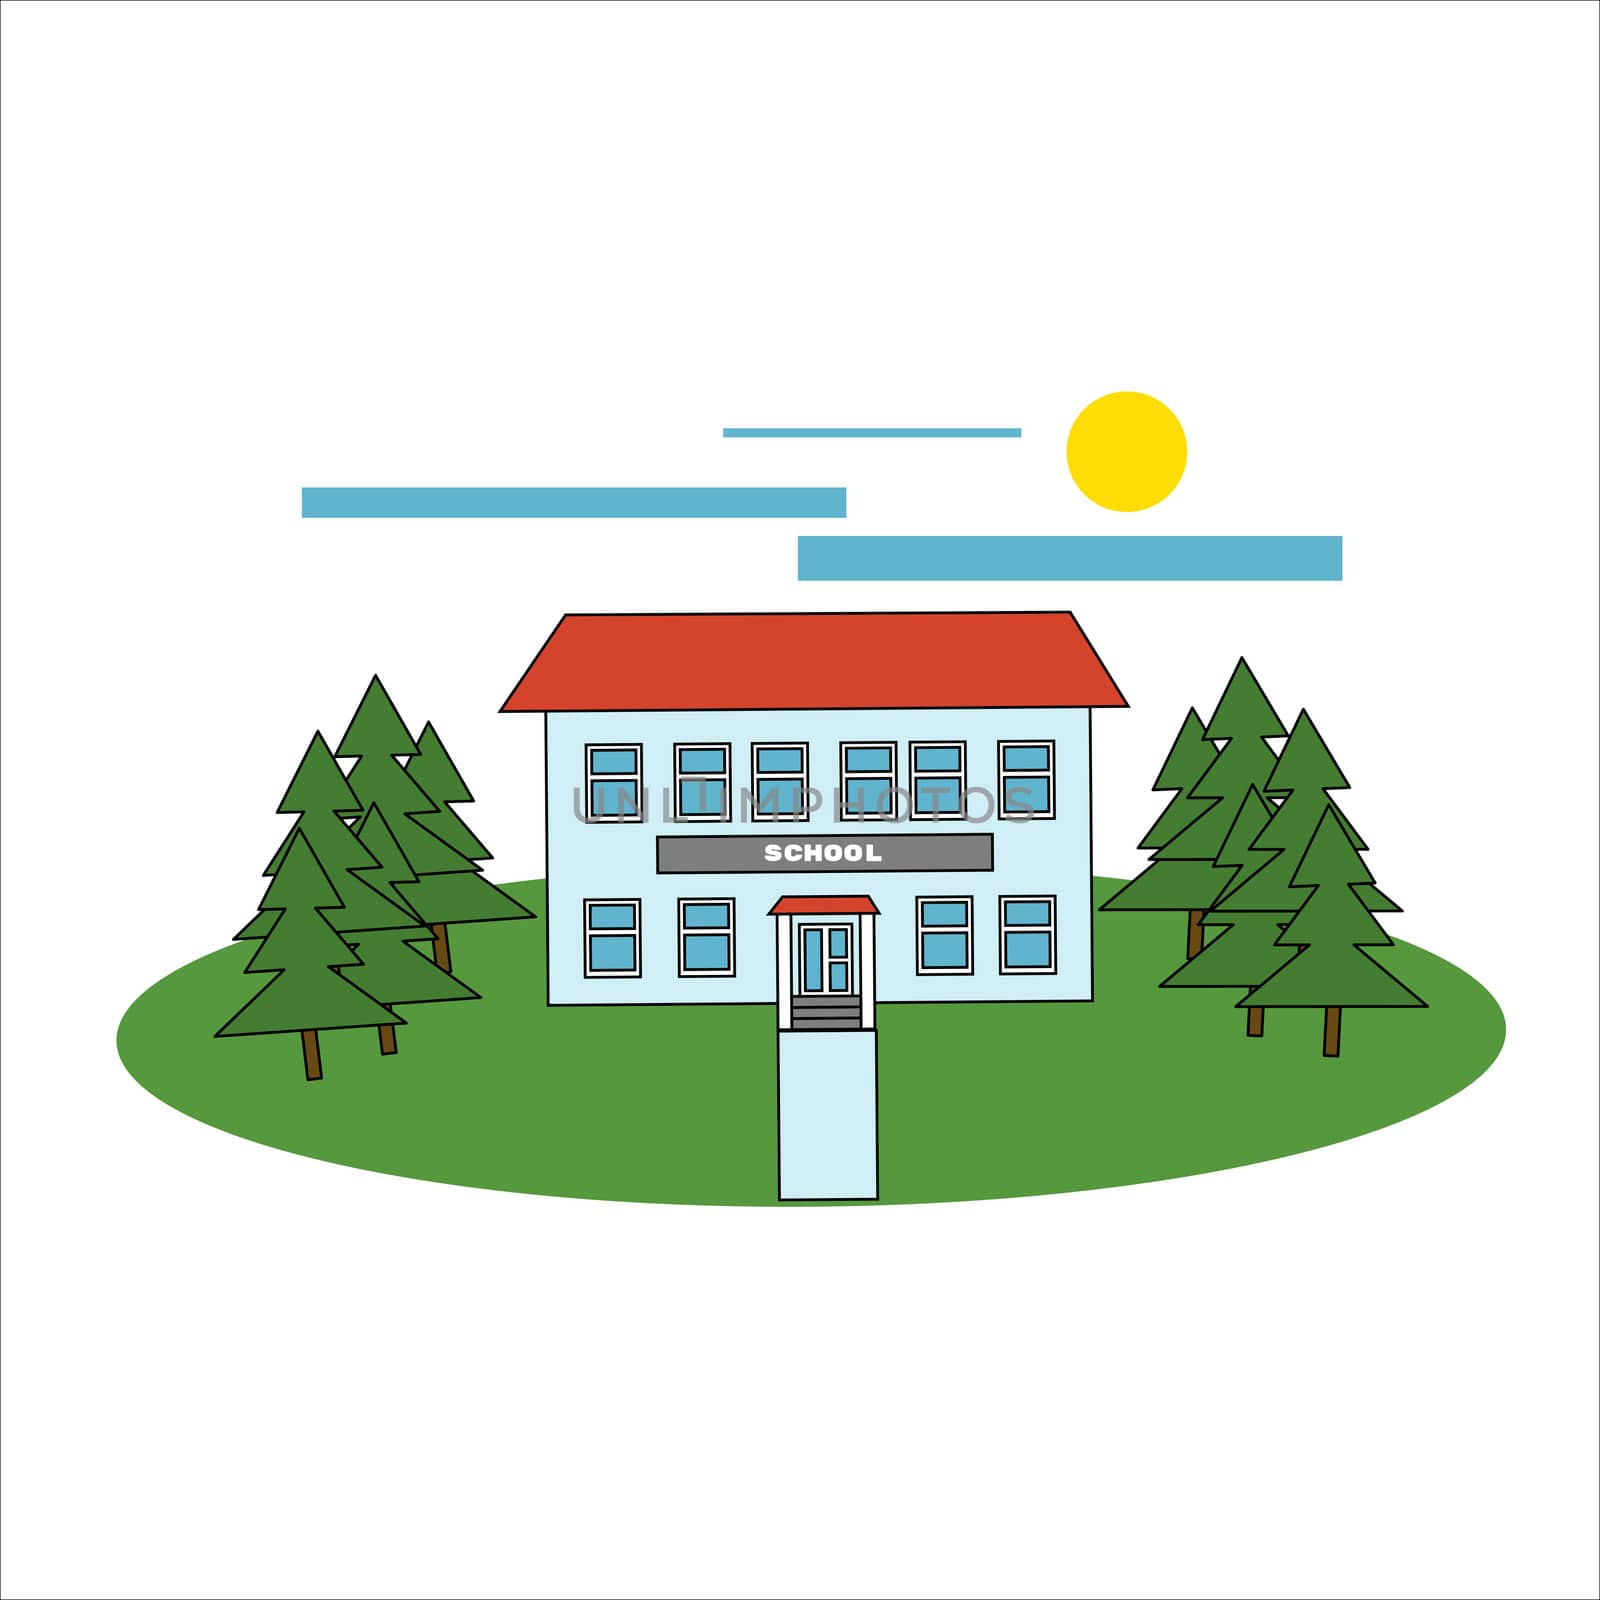 School building and bus. illustration in filled outline style